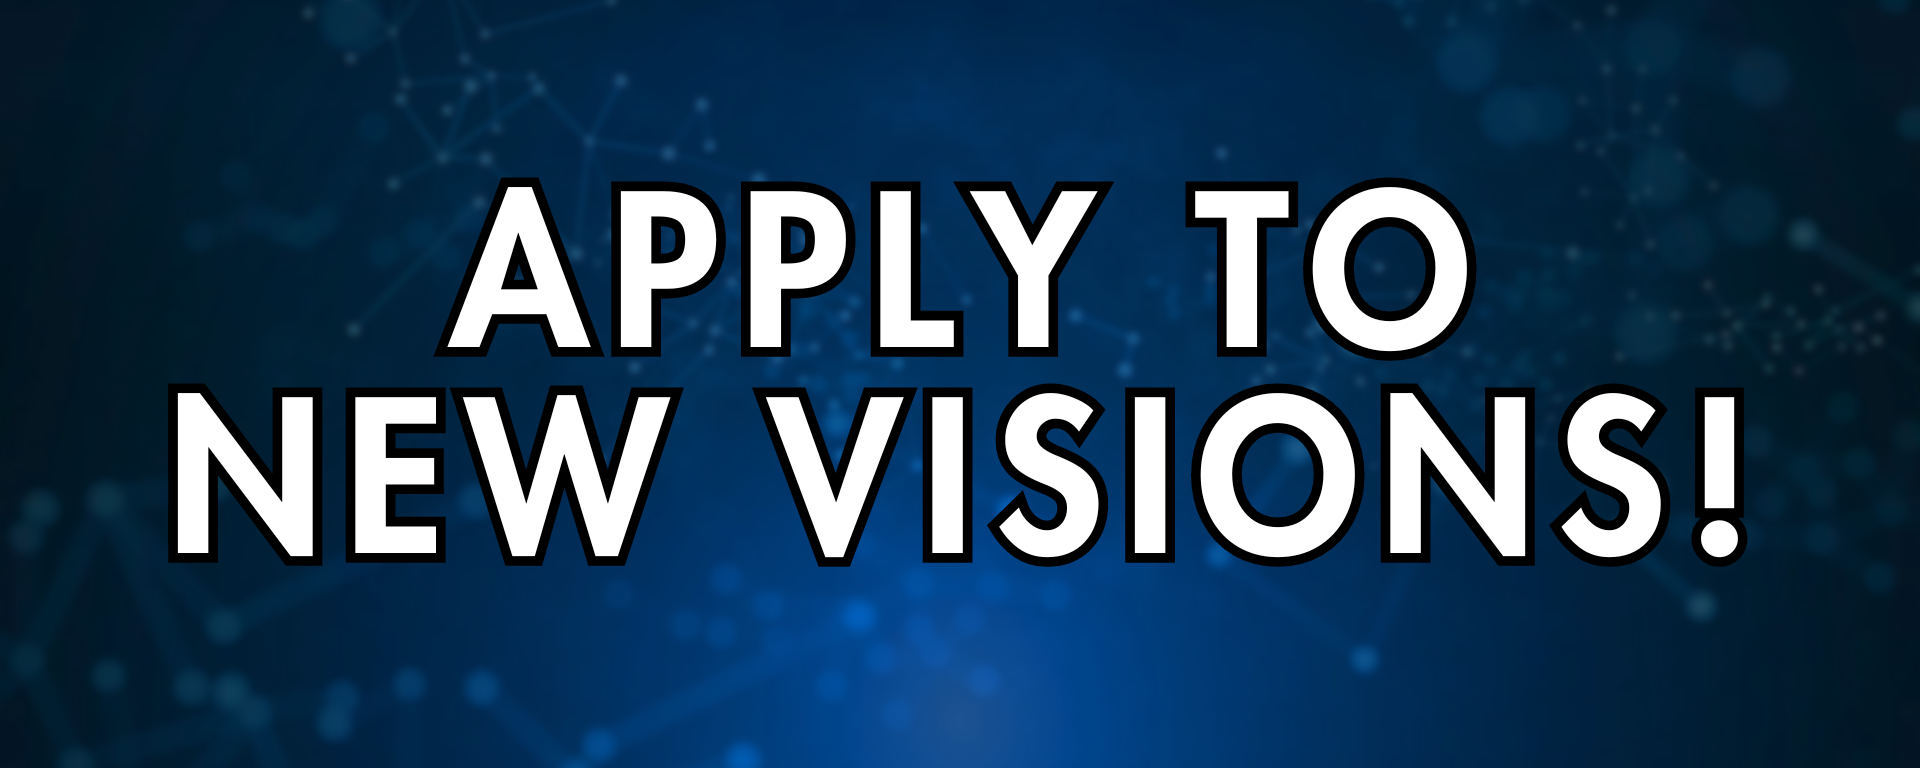 APPLY TO NEW VISIONS BANNER